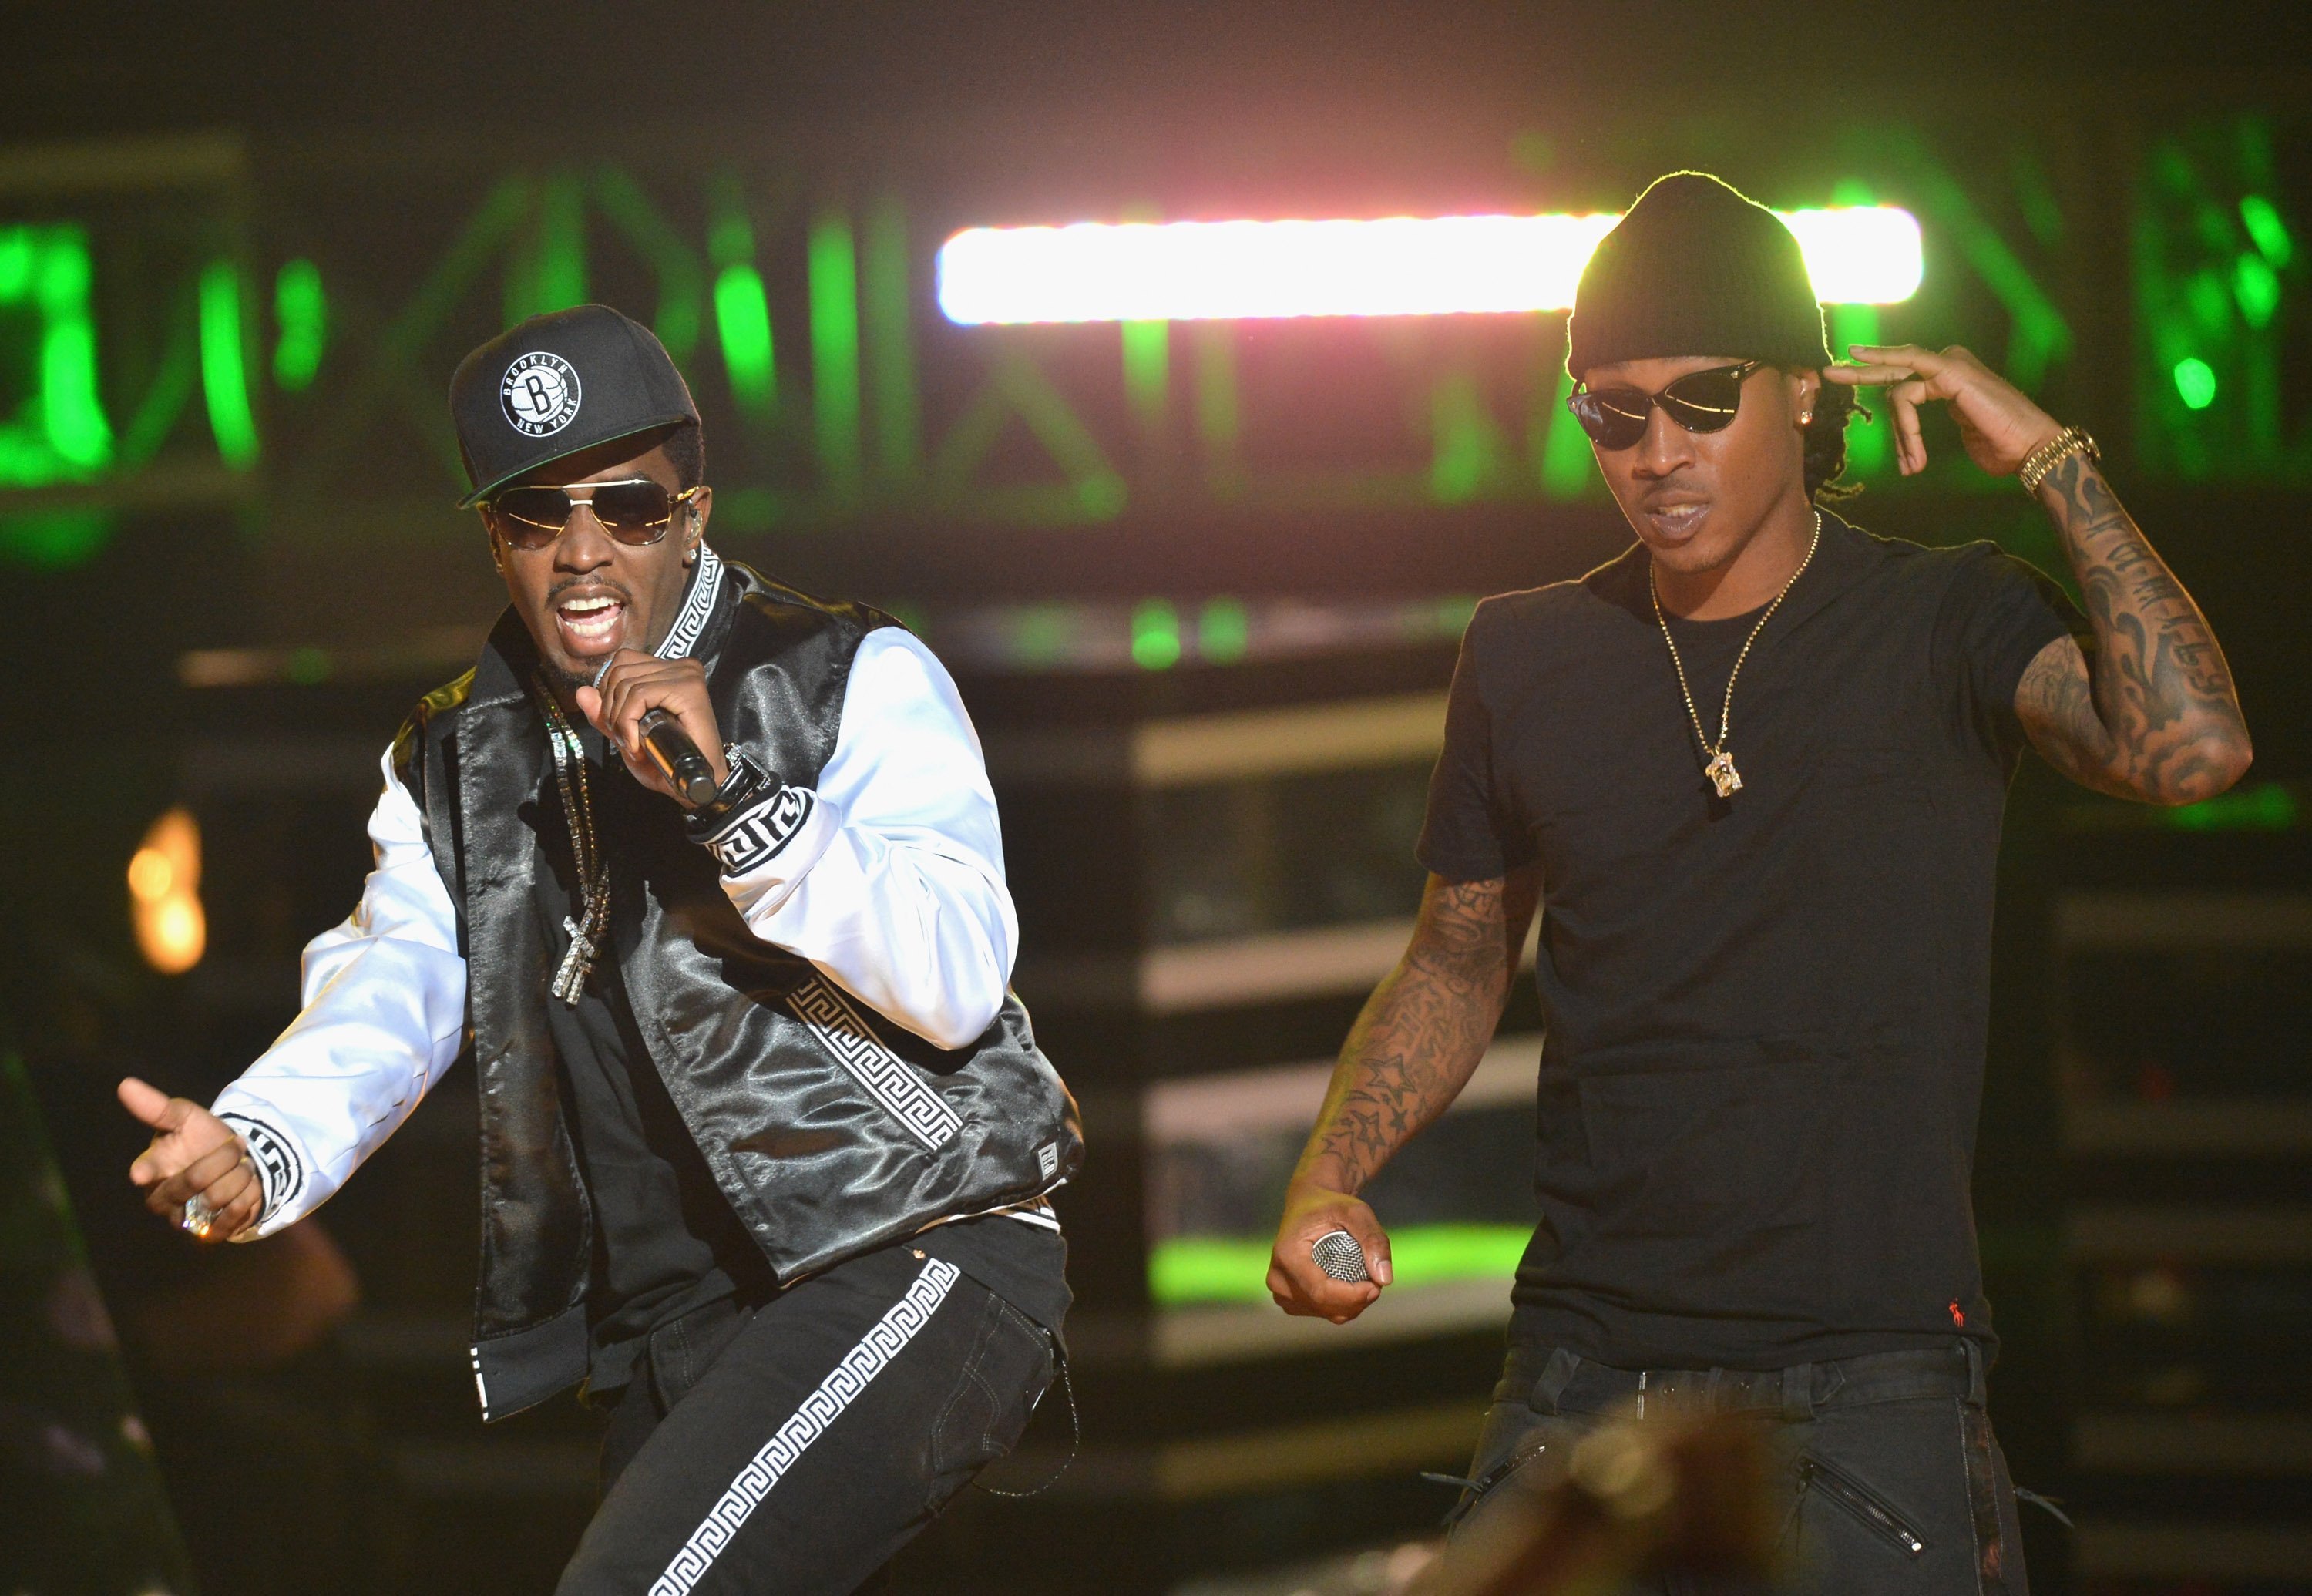 ATLANTA, GA - SEPTEMBER 29: Sean Combs, 'P. Diddy,' (L) and Future perform onstage at the 2012 BET Hip Hop Awards at Boisfeuillet Jones Atlanta Civic Center| Photos: Getty Images